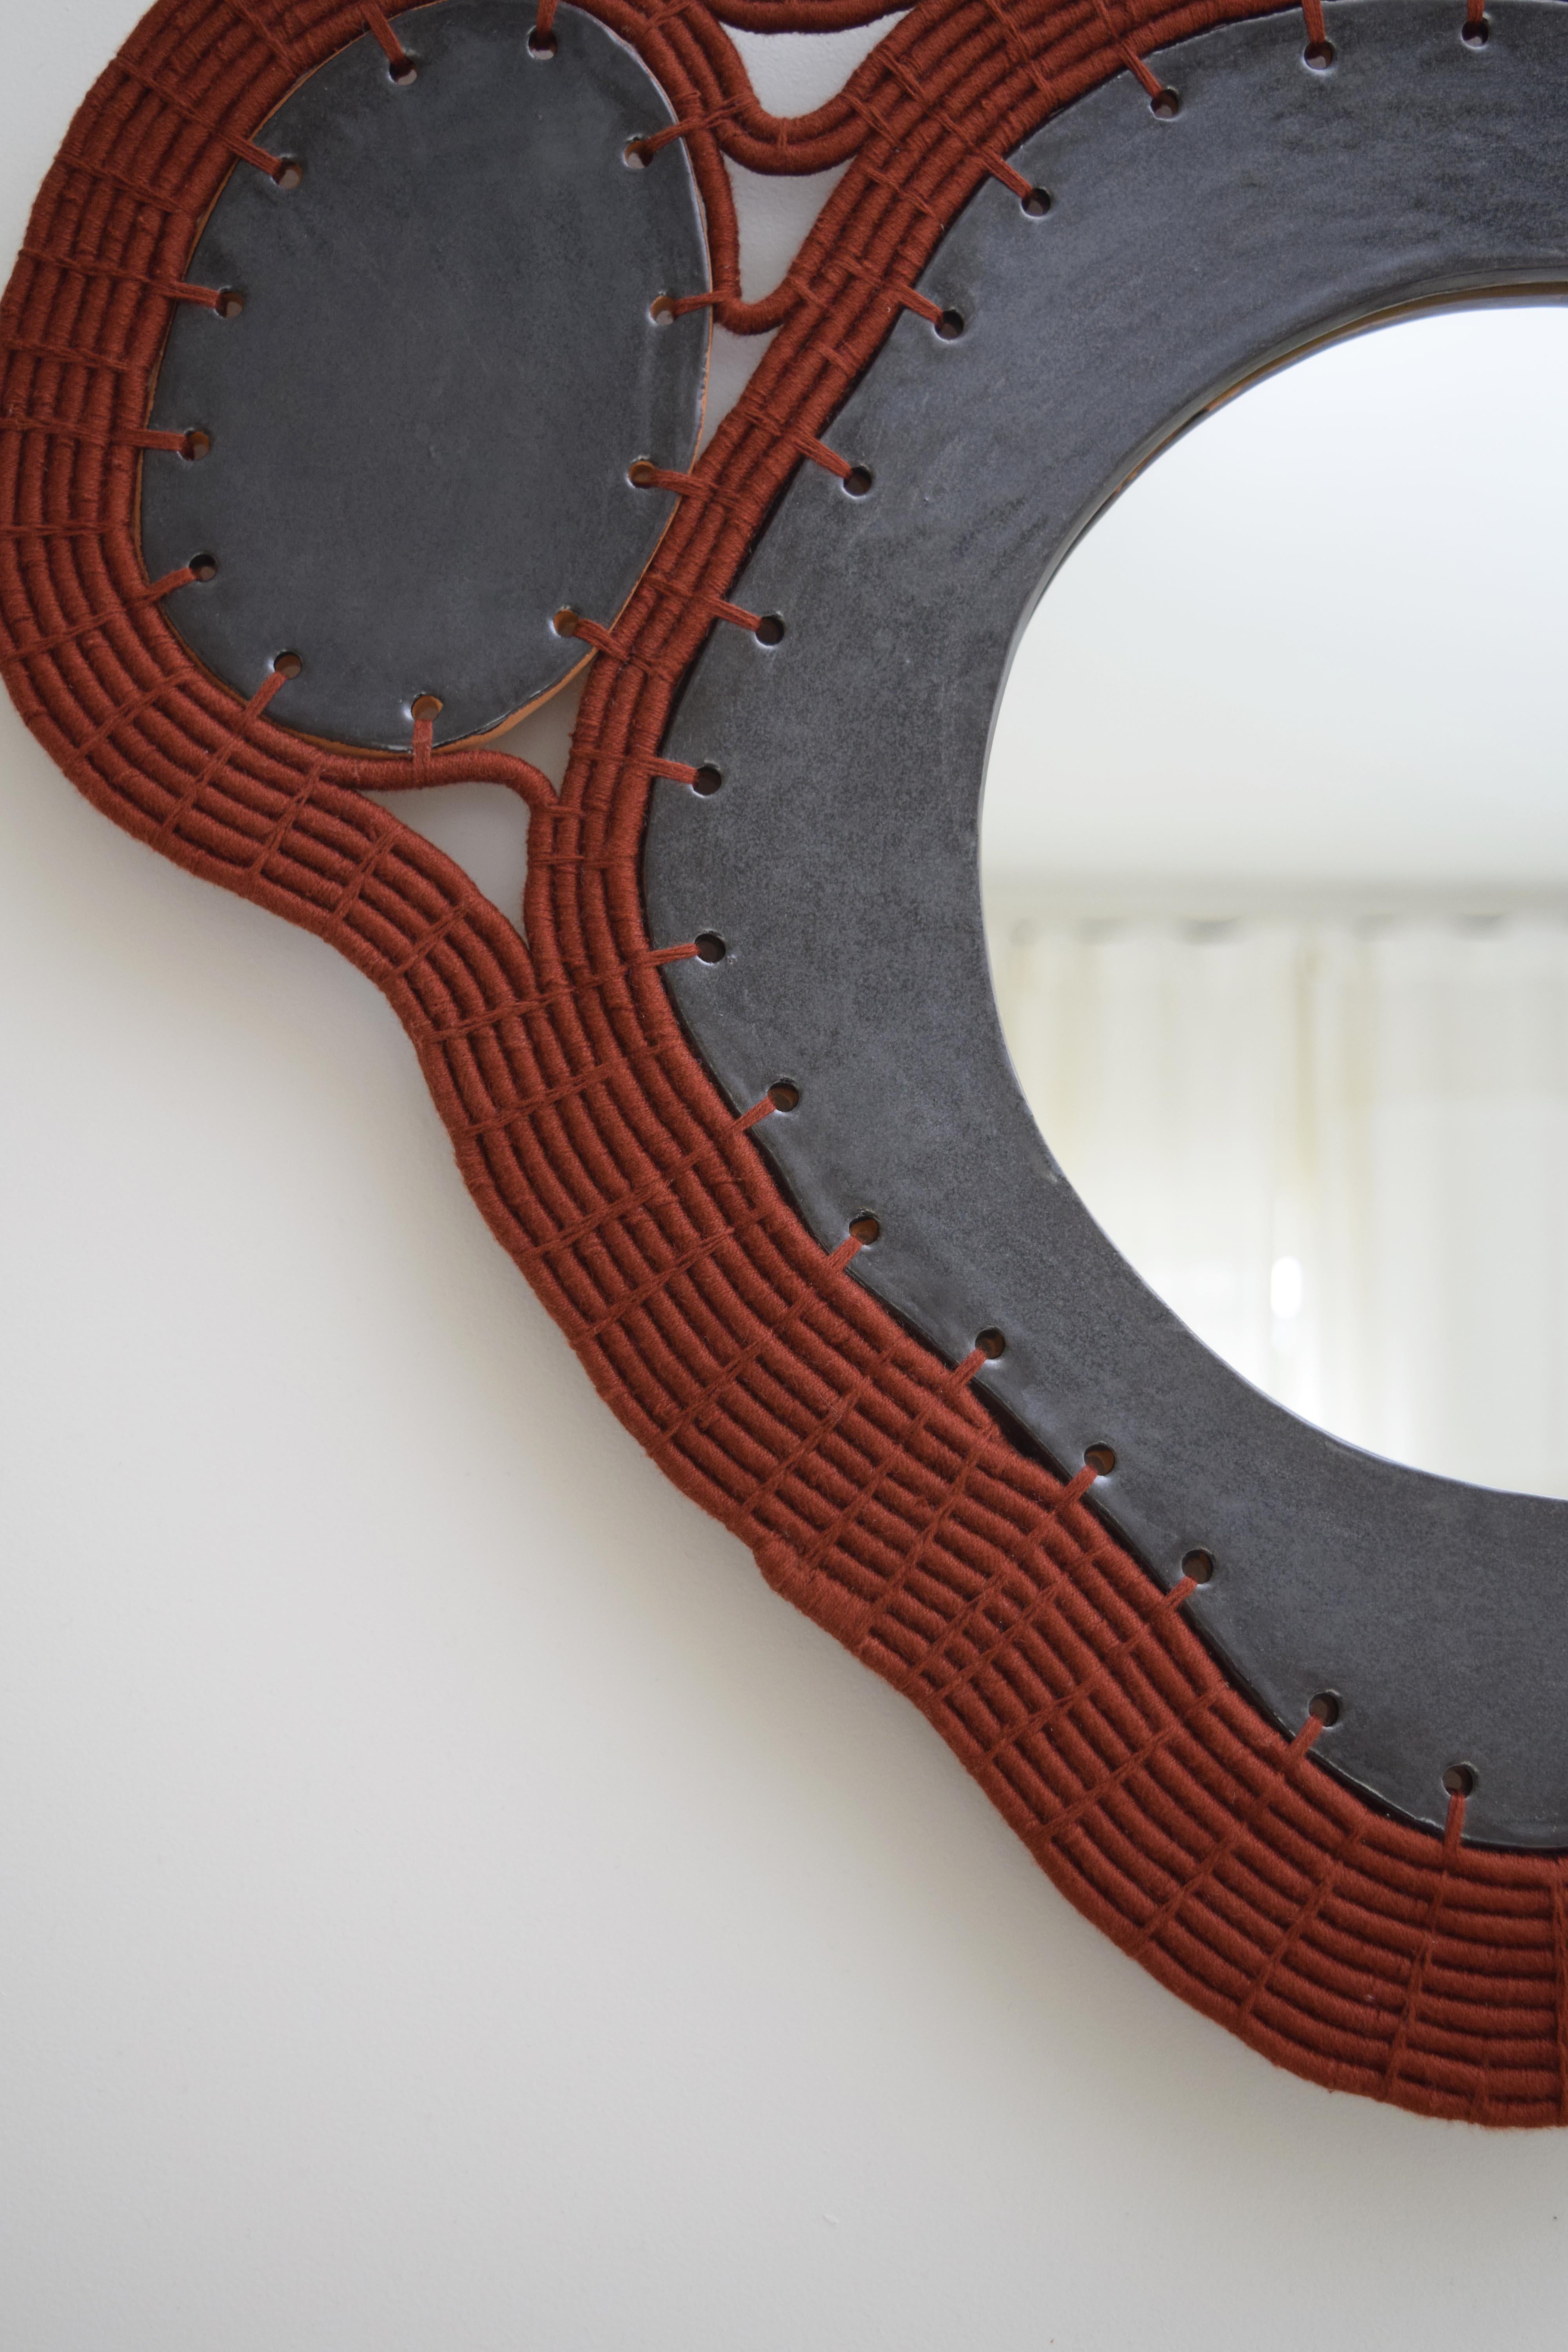 American One of a Kind Handmade Mirror #794, Woven Rusty Cotton & Black Glazed Ceramic For Sale